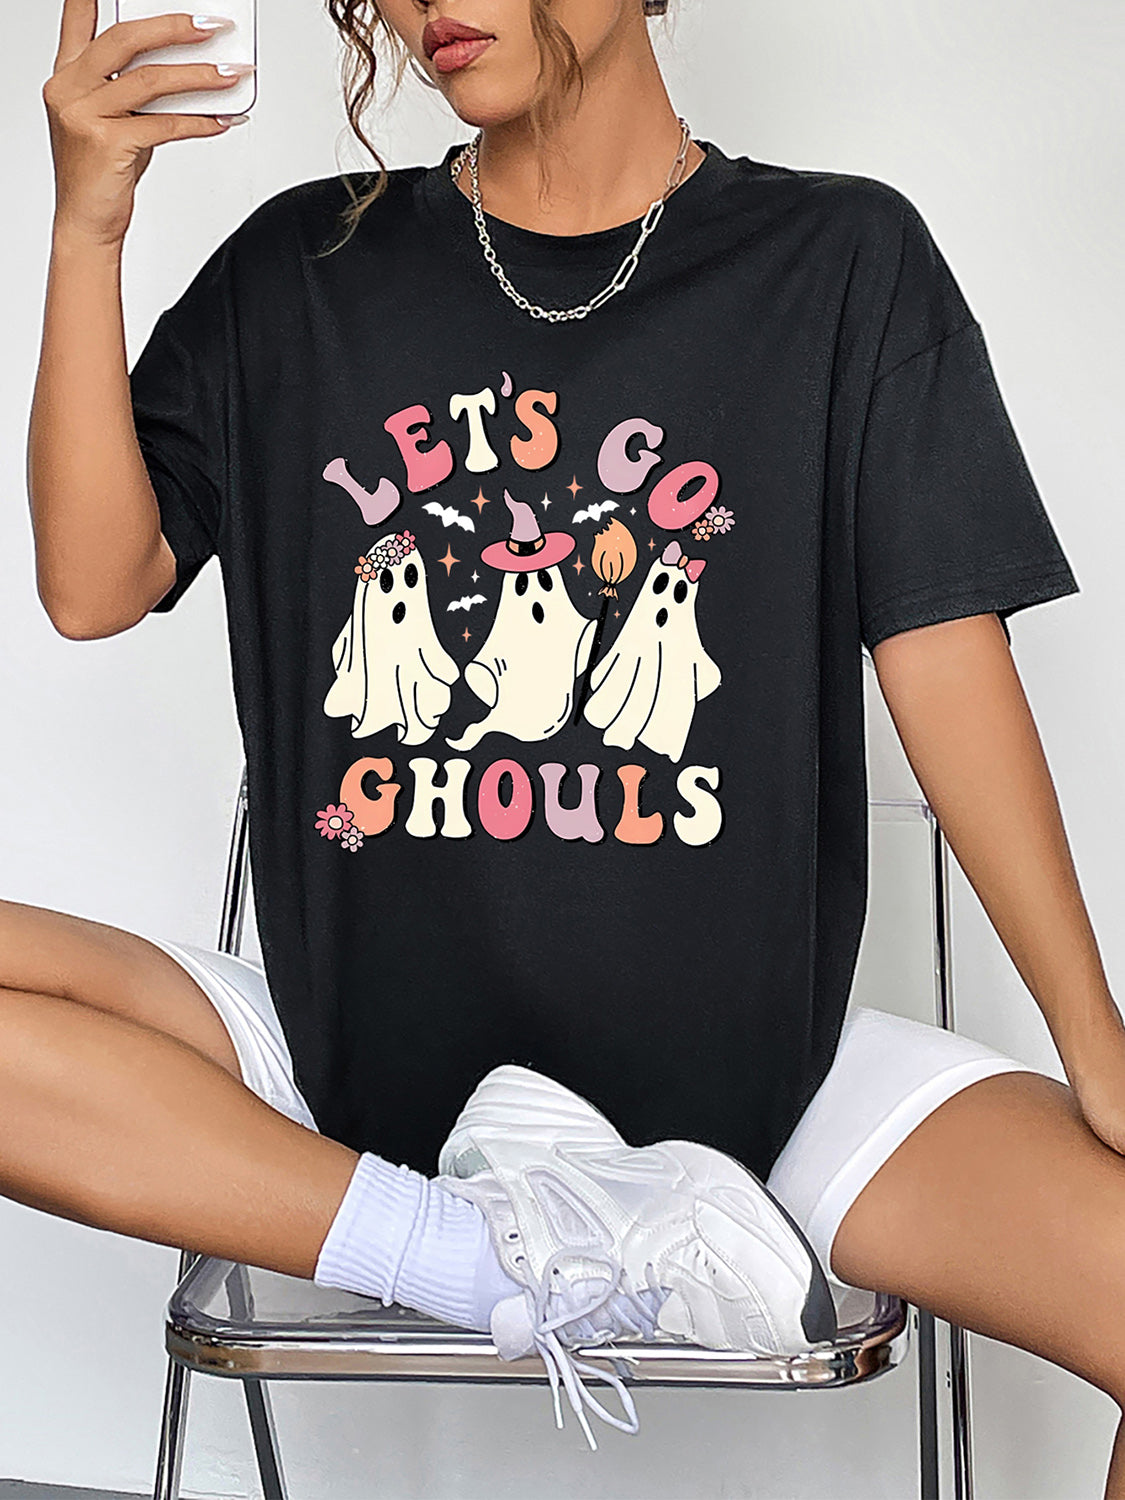 LET'S GO GHOULS Graphic Tee